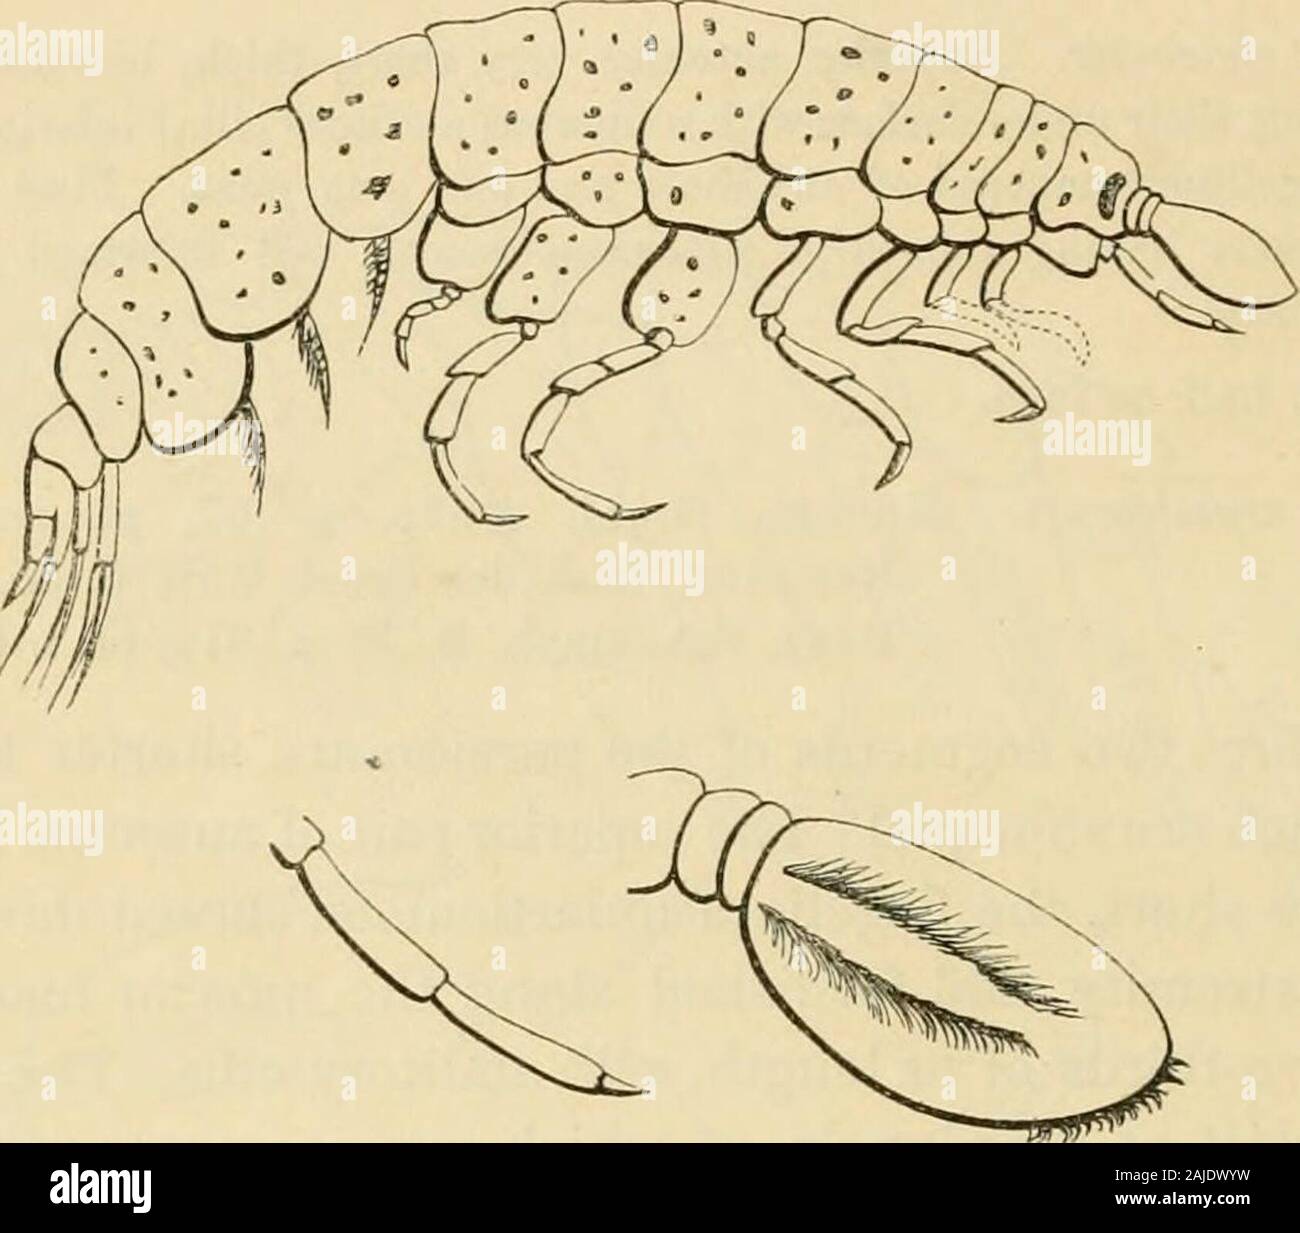 A history of the British sessile-eyed Crustacea . distended, the latter fringed alongthe inferior margin with a row of very fine short cilia, and afew long equidistant solitaiy hairs ; propodos and dactylosreduced in character to a biarticulate joint, that bonds back toform a prehensile organ with the carpus. The third pair ofpereiopoda are very long, quite as long again as the next suc-ceeding pairs, having the propodos and carpus subequal inlength, and the former furnished on the anterior margin witha comb-like row of fine teeth ; dactylos short and slender.The two last pairs of pereiopoda a Stock Photo